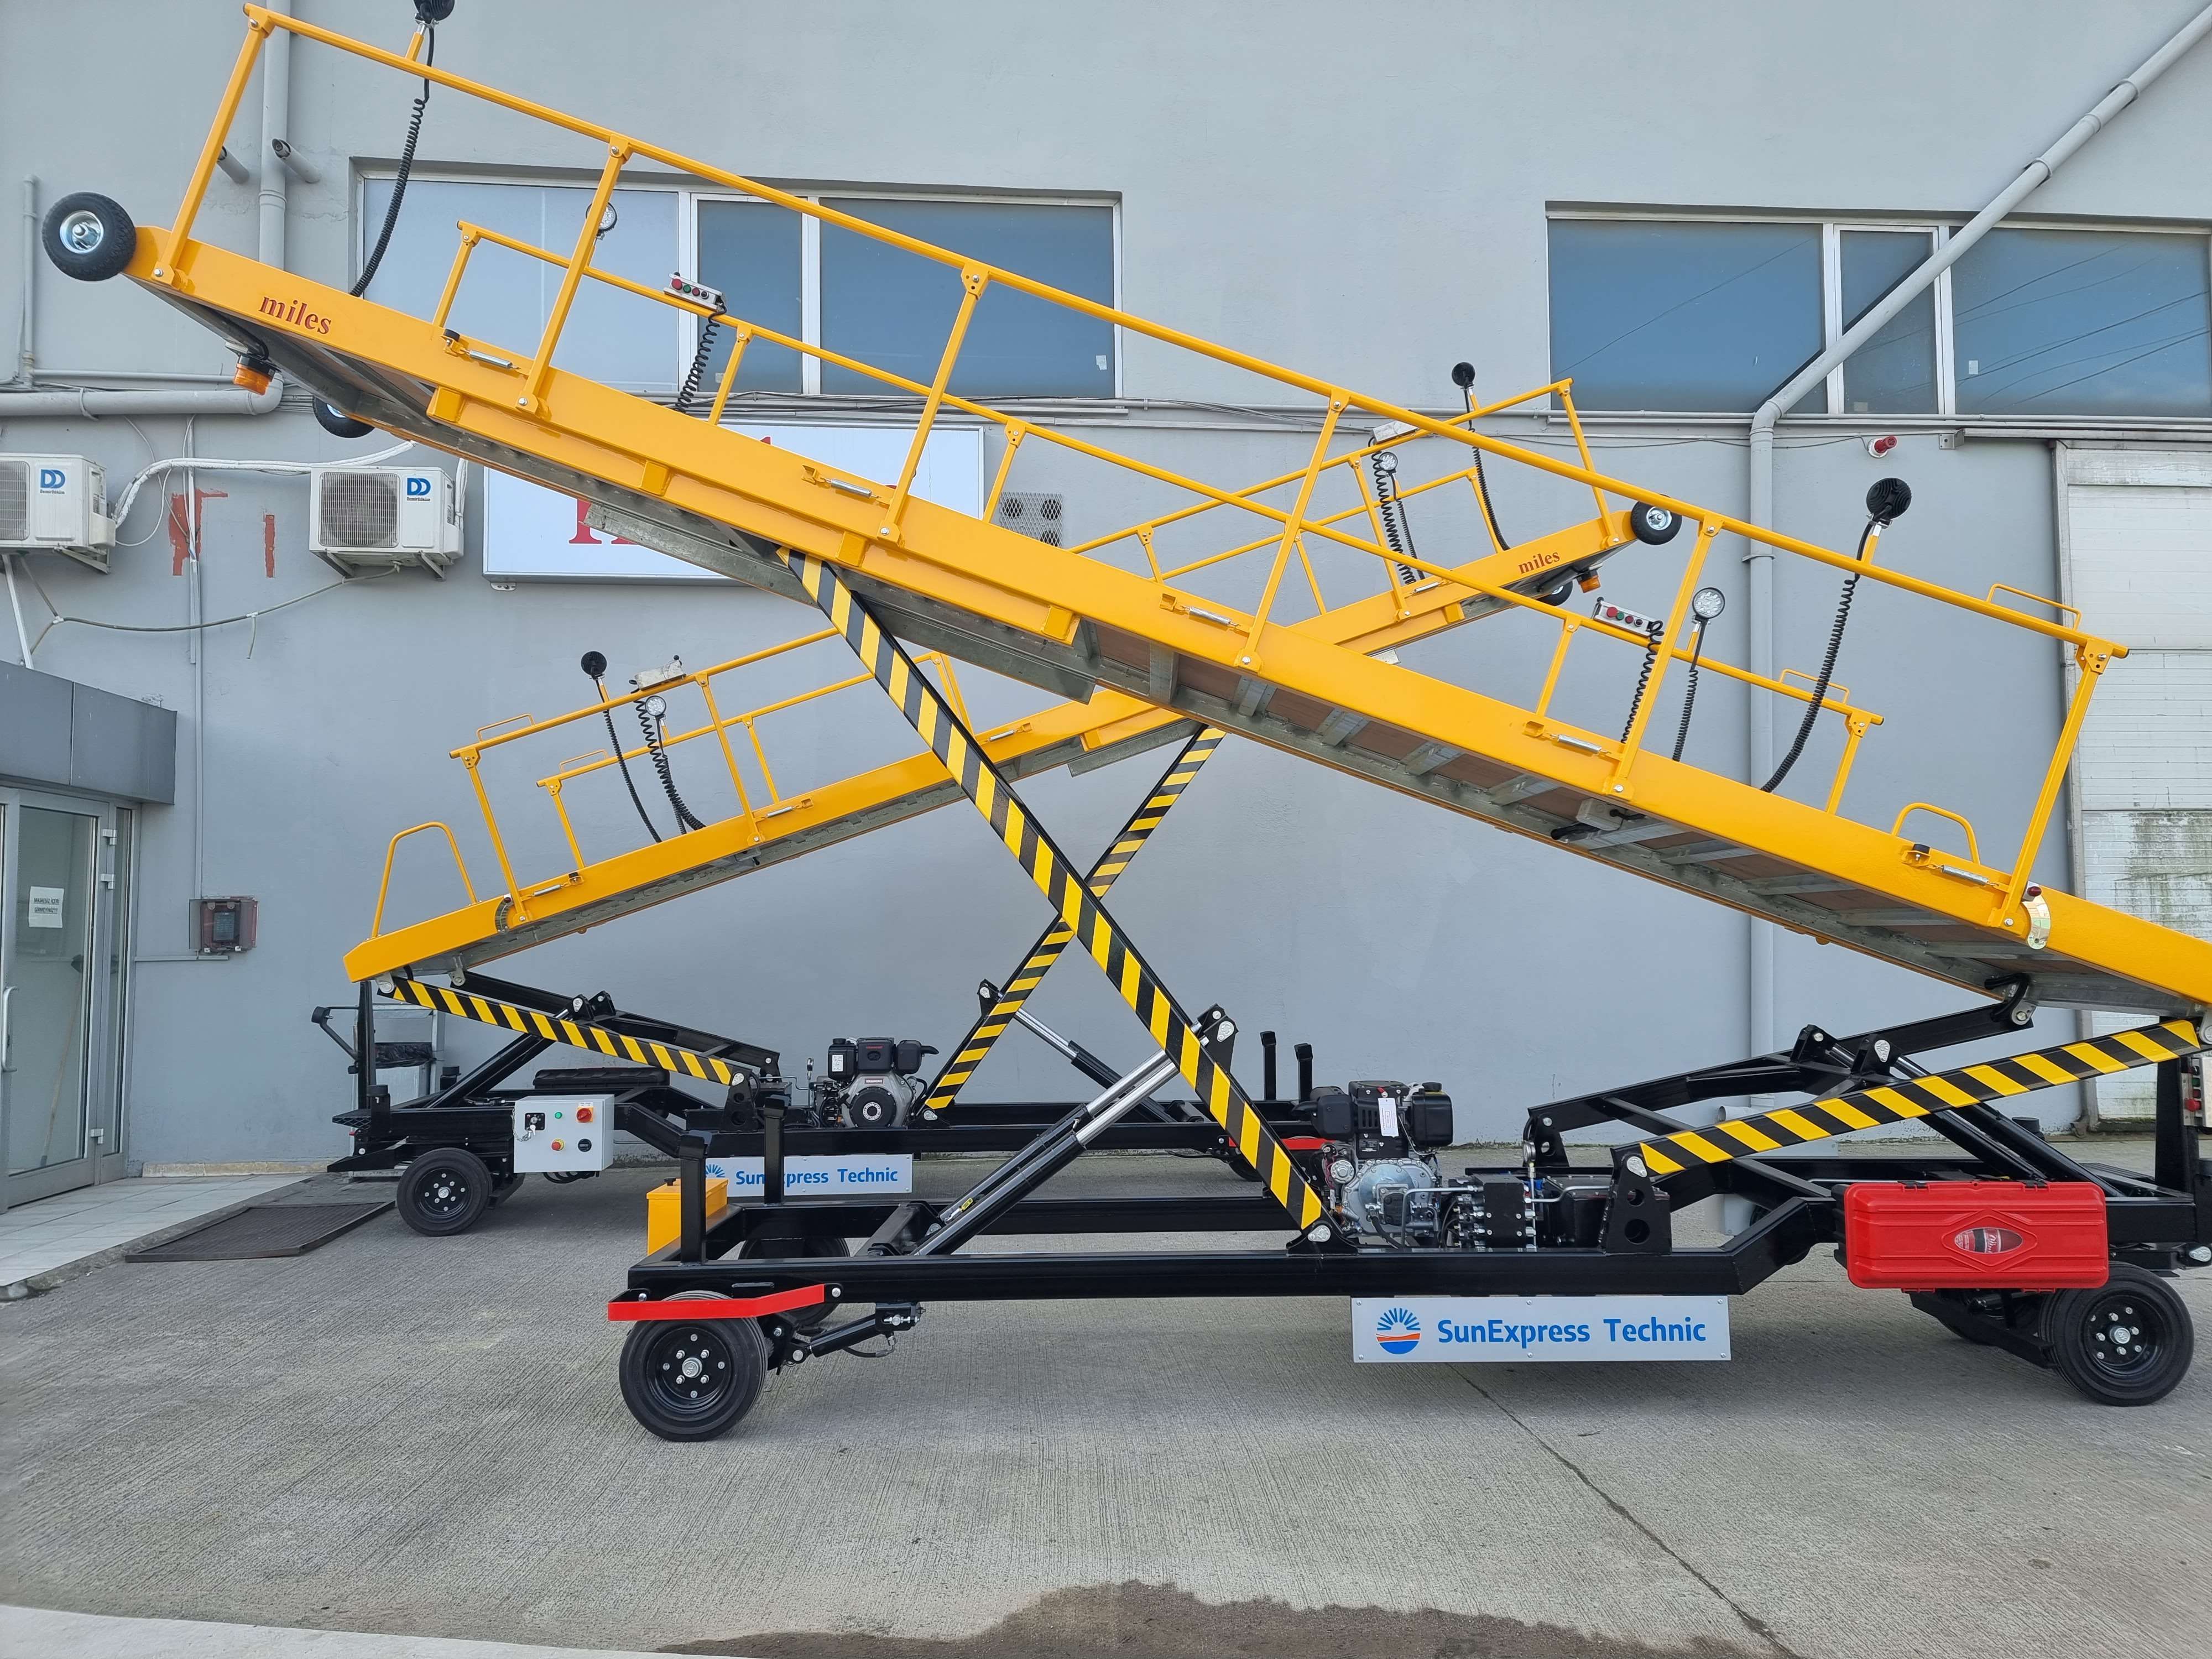 Production and delivery of two units of Mobile Maintenance Platforms to SunExpress., Turkish Aviation Industry, Ground Support Equipment